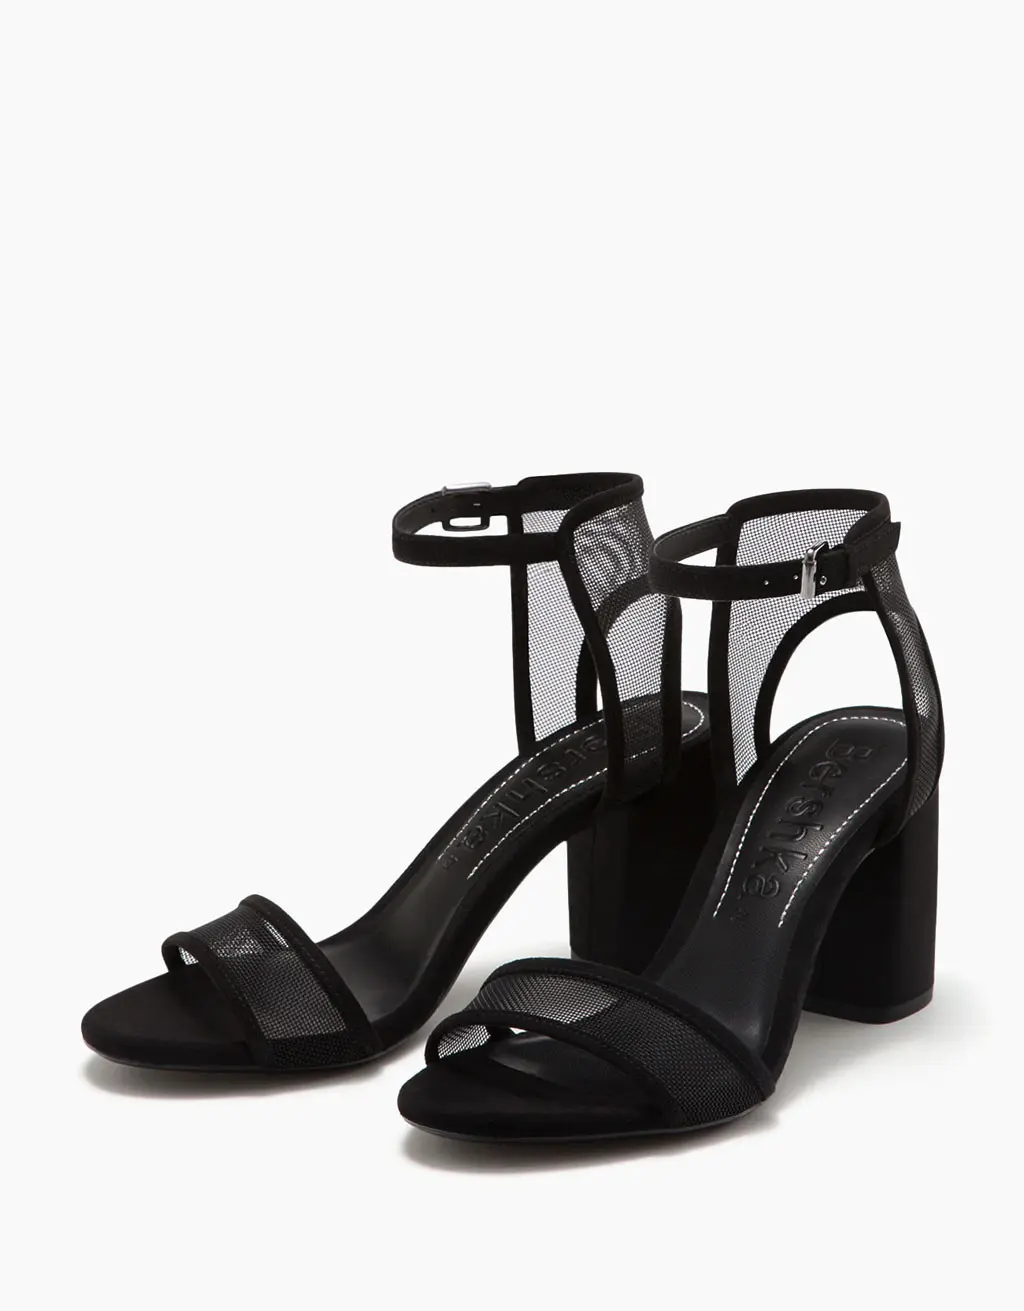 Mesh mid-heel sandals with ankle straps. (Image: bershka.com)